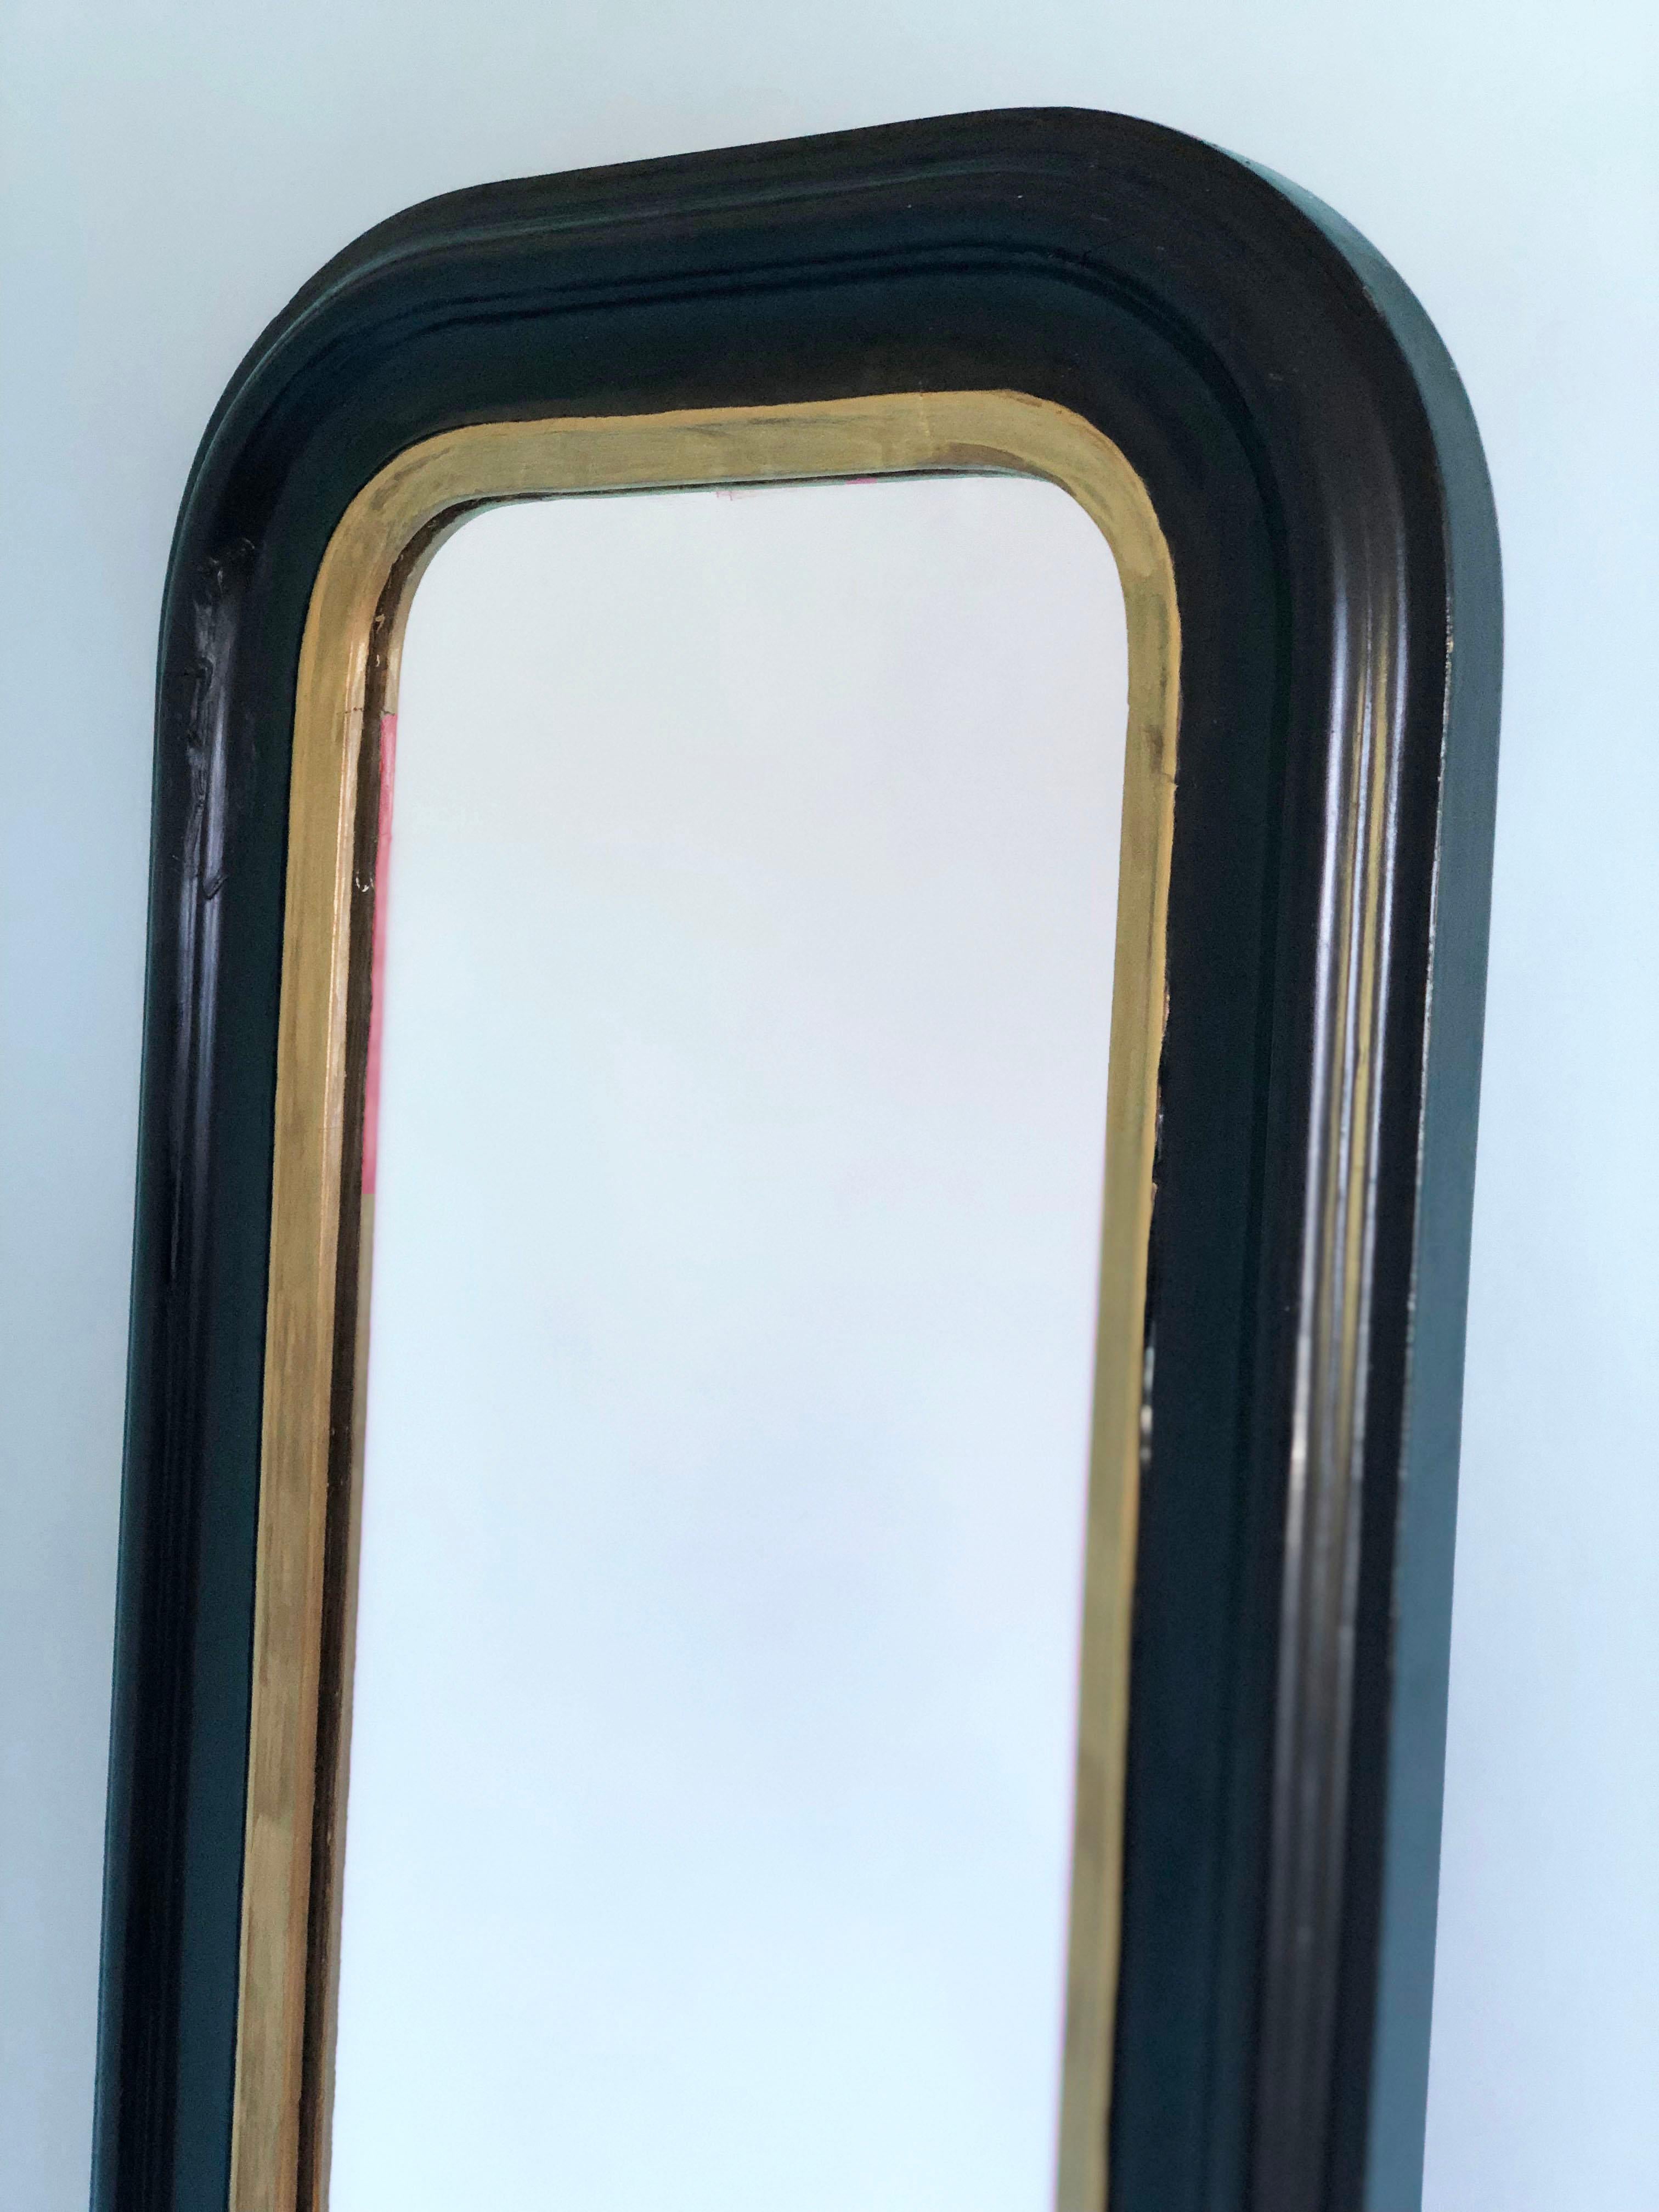 Antique 19th Century giltwood Louis Philippe Full Length mirror in black and gold with curved top corners. Original mercury glass and back.

Beautifully weathered mirror In good condition. France, Late 19th Century.

Object: Mirror
Designer: